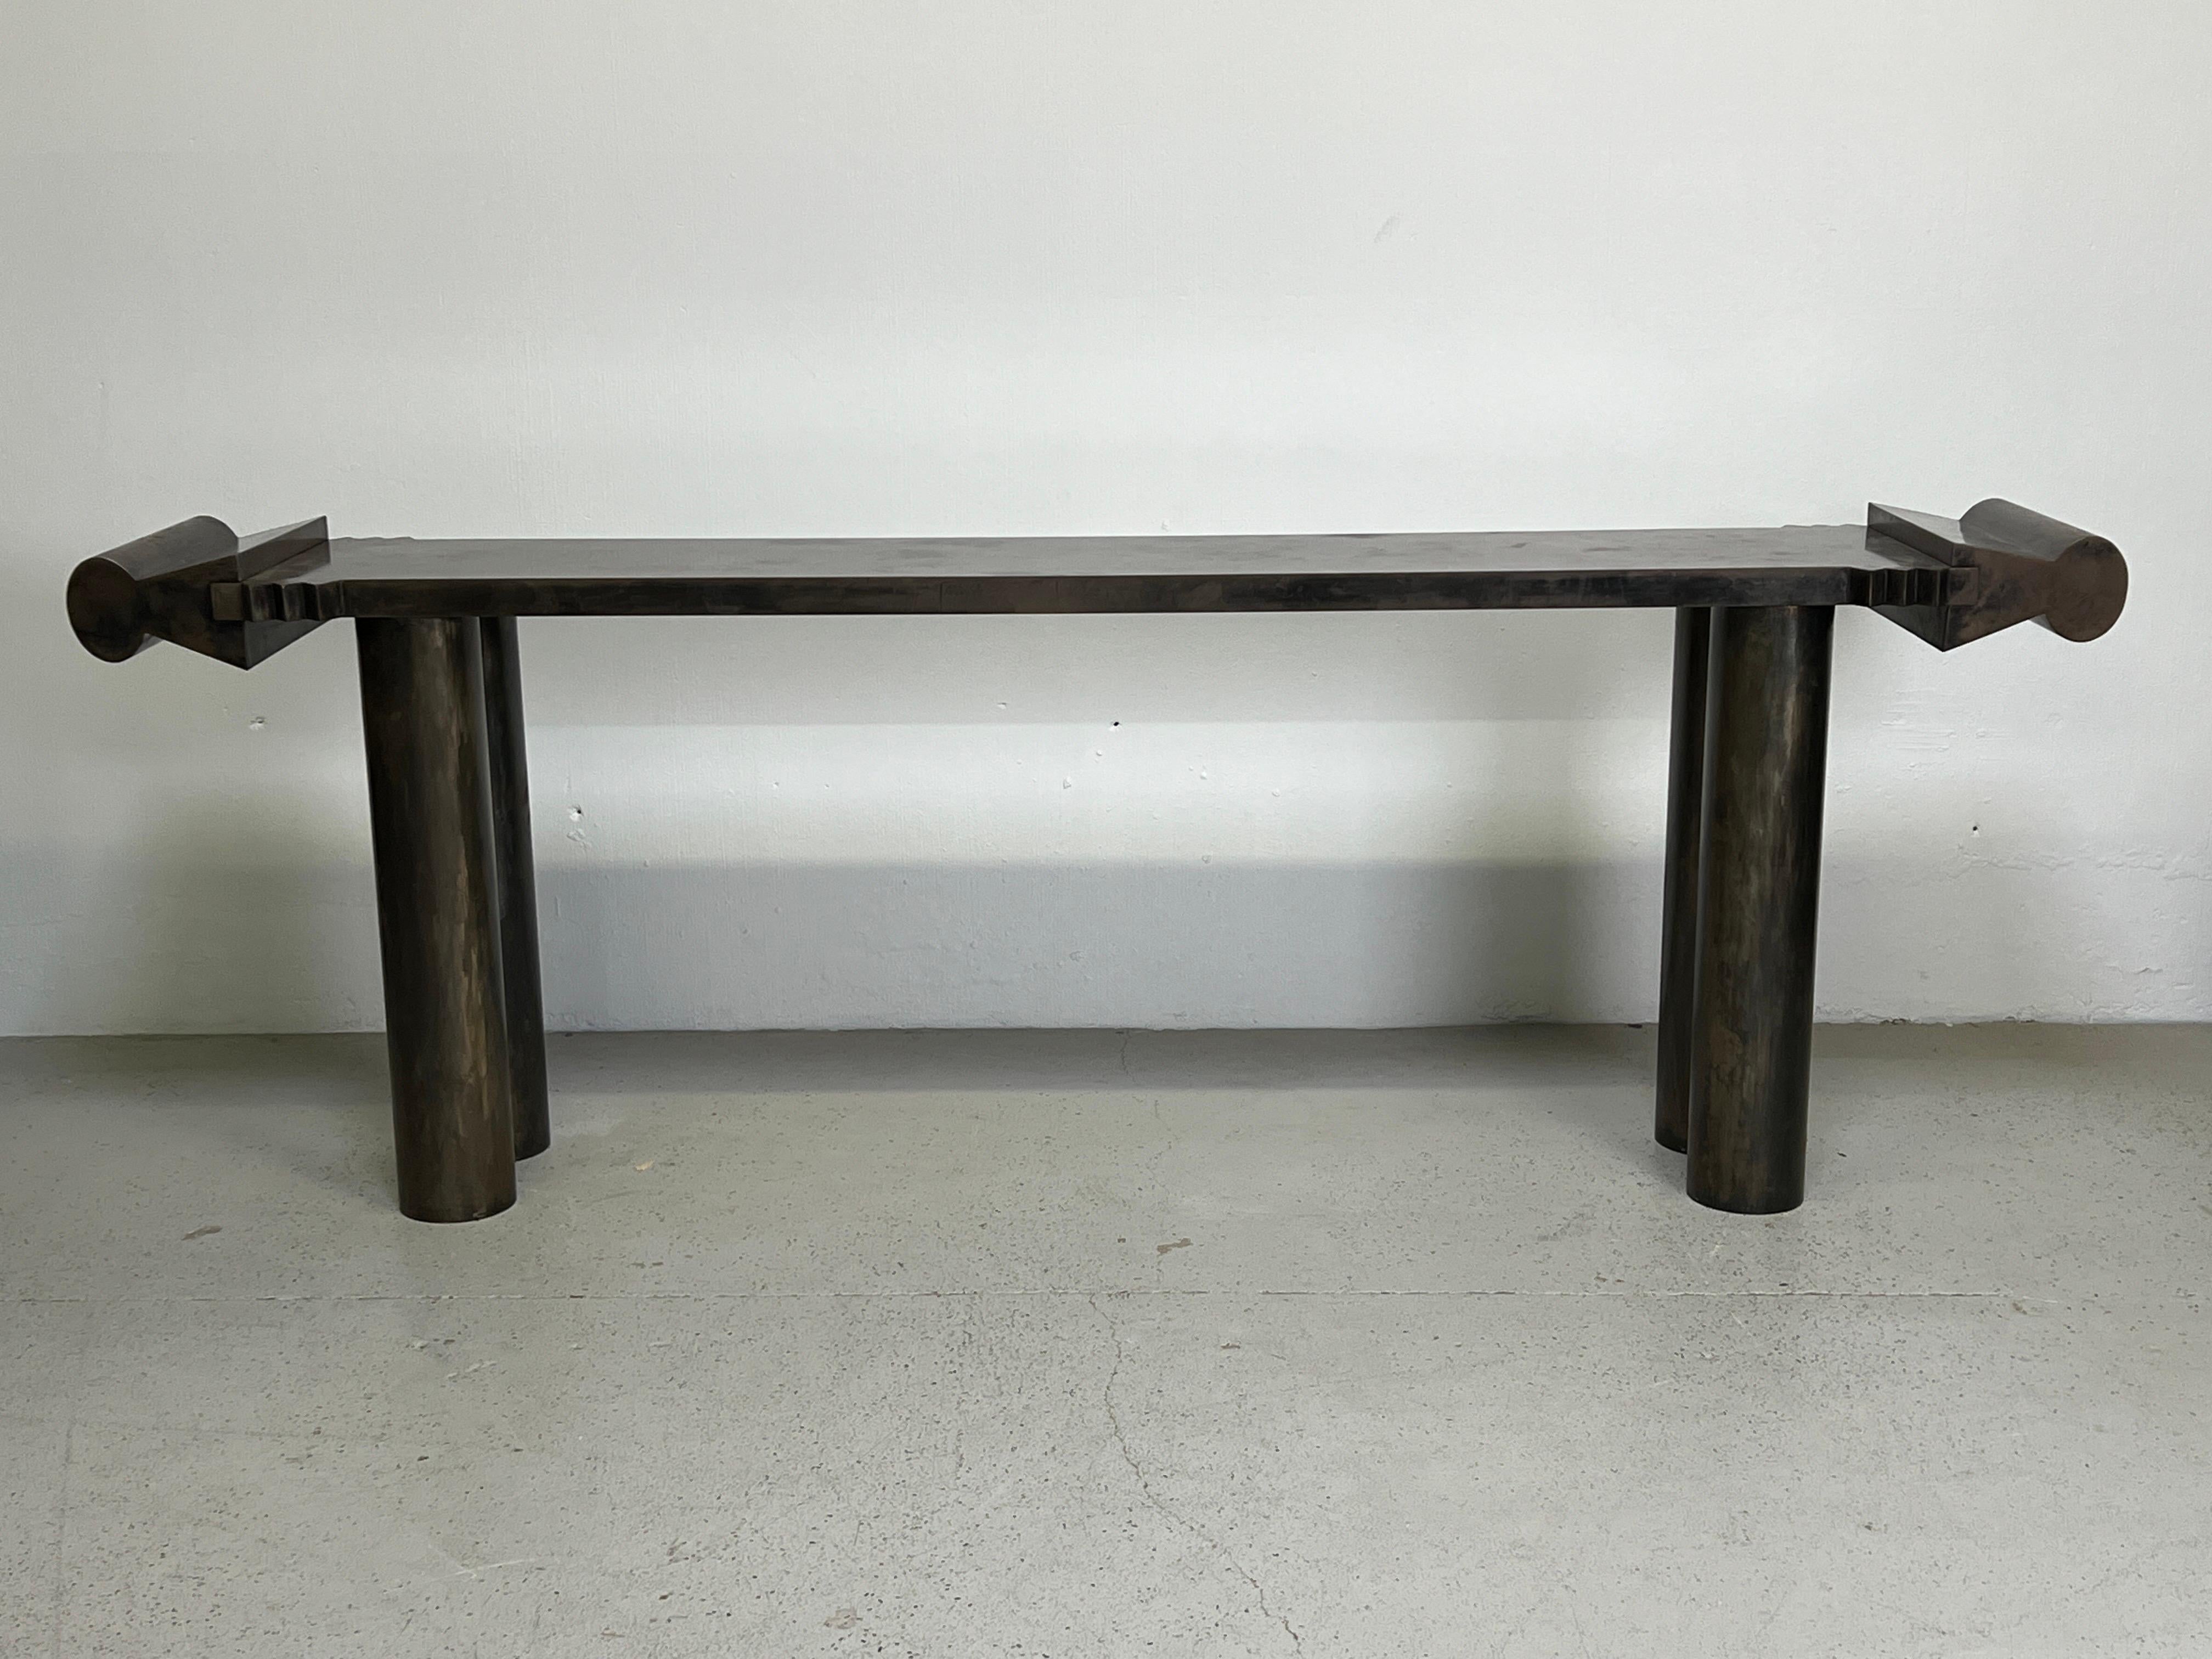 A large scale patinated steel console table titled 'Black Freighter' by Garry Knox Bennett. This work was a custom commission in 1990.